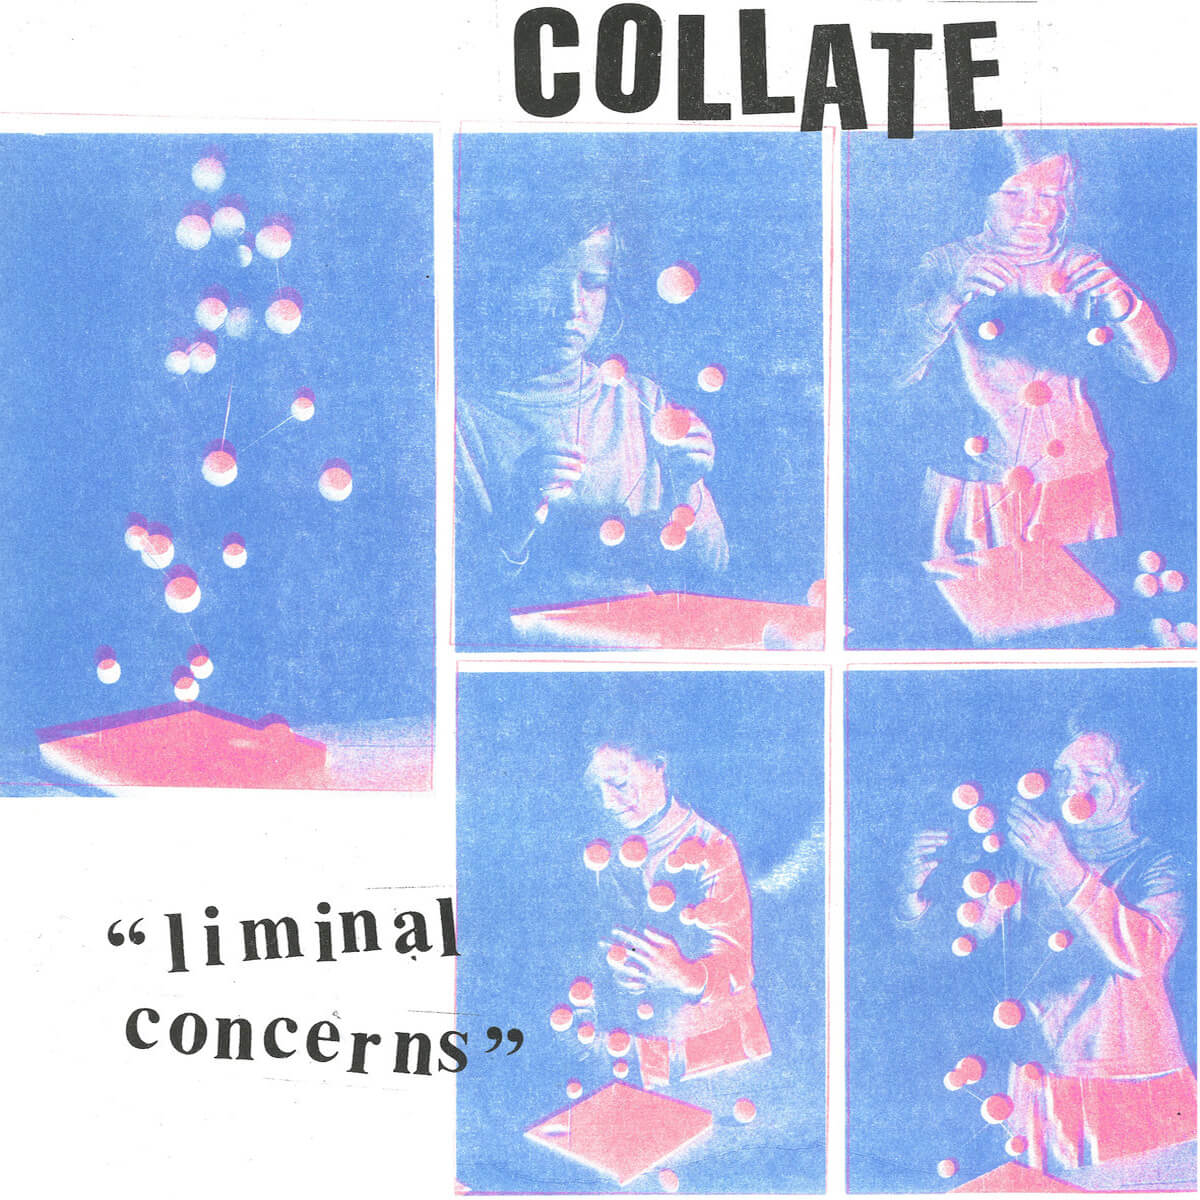 Collate - Liminal Concerns - Self-released